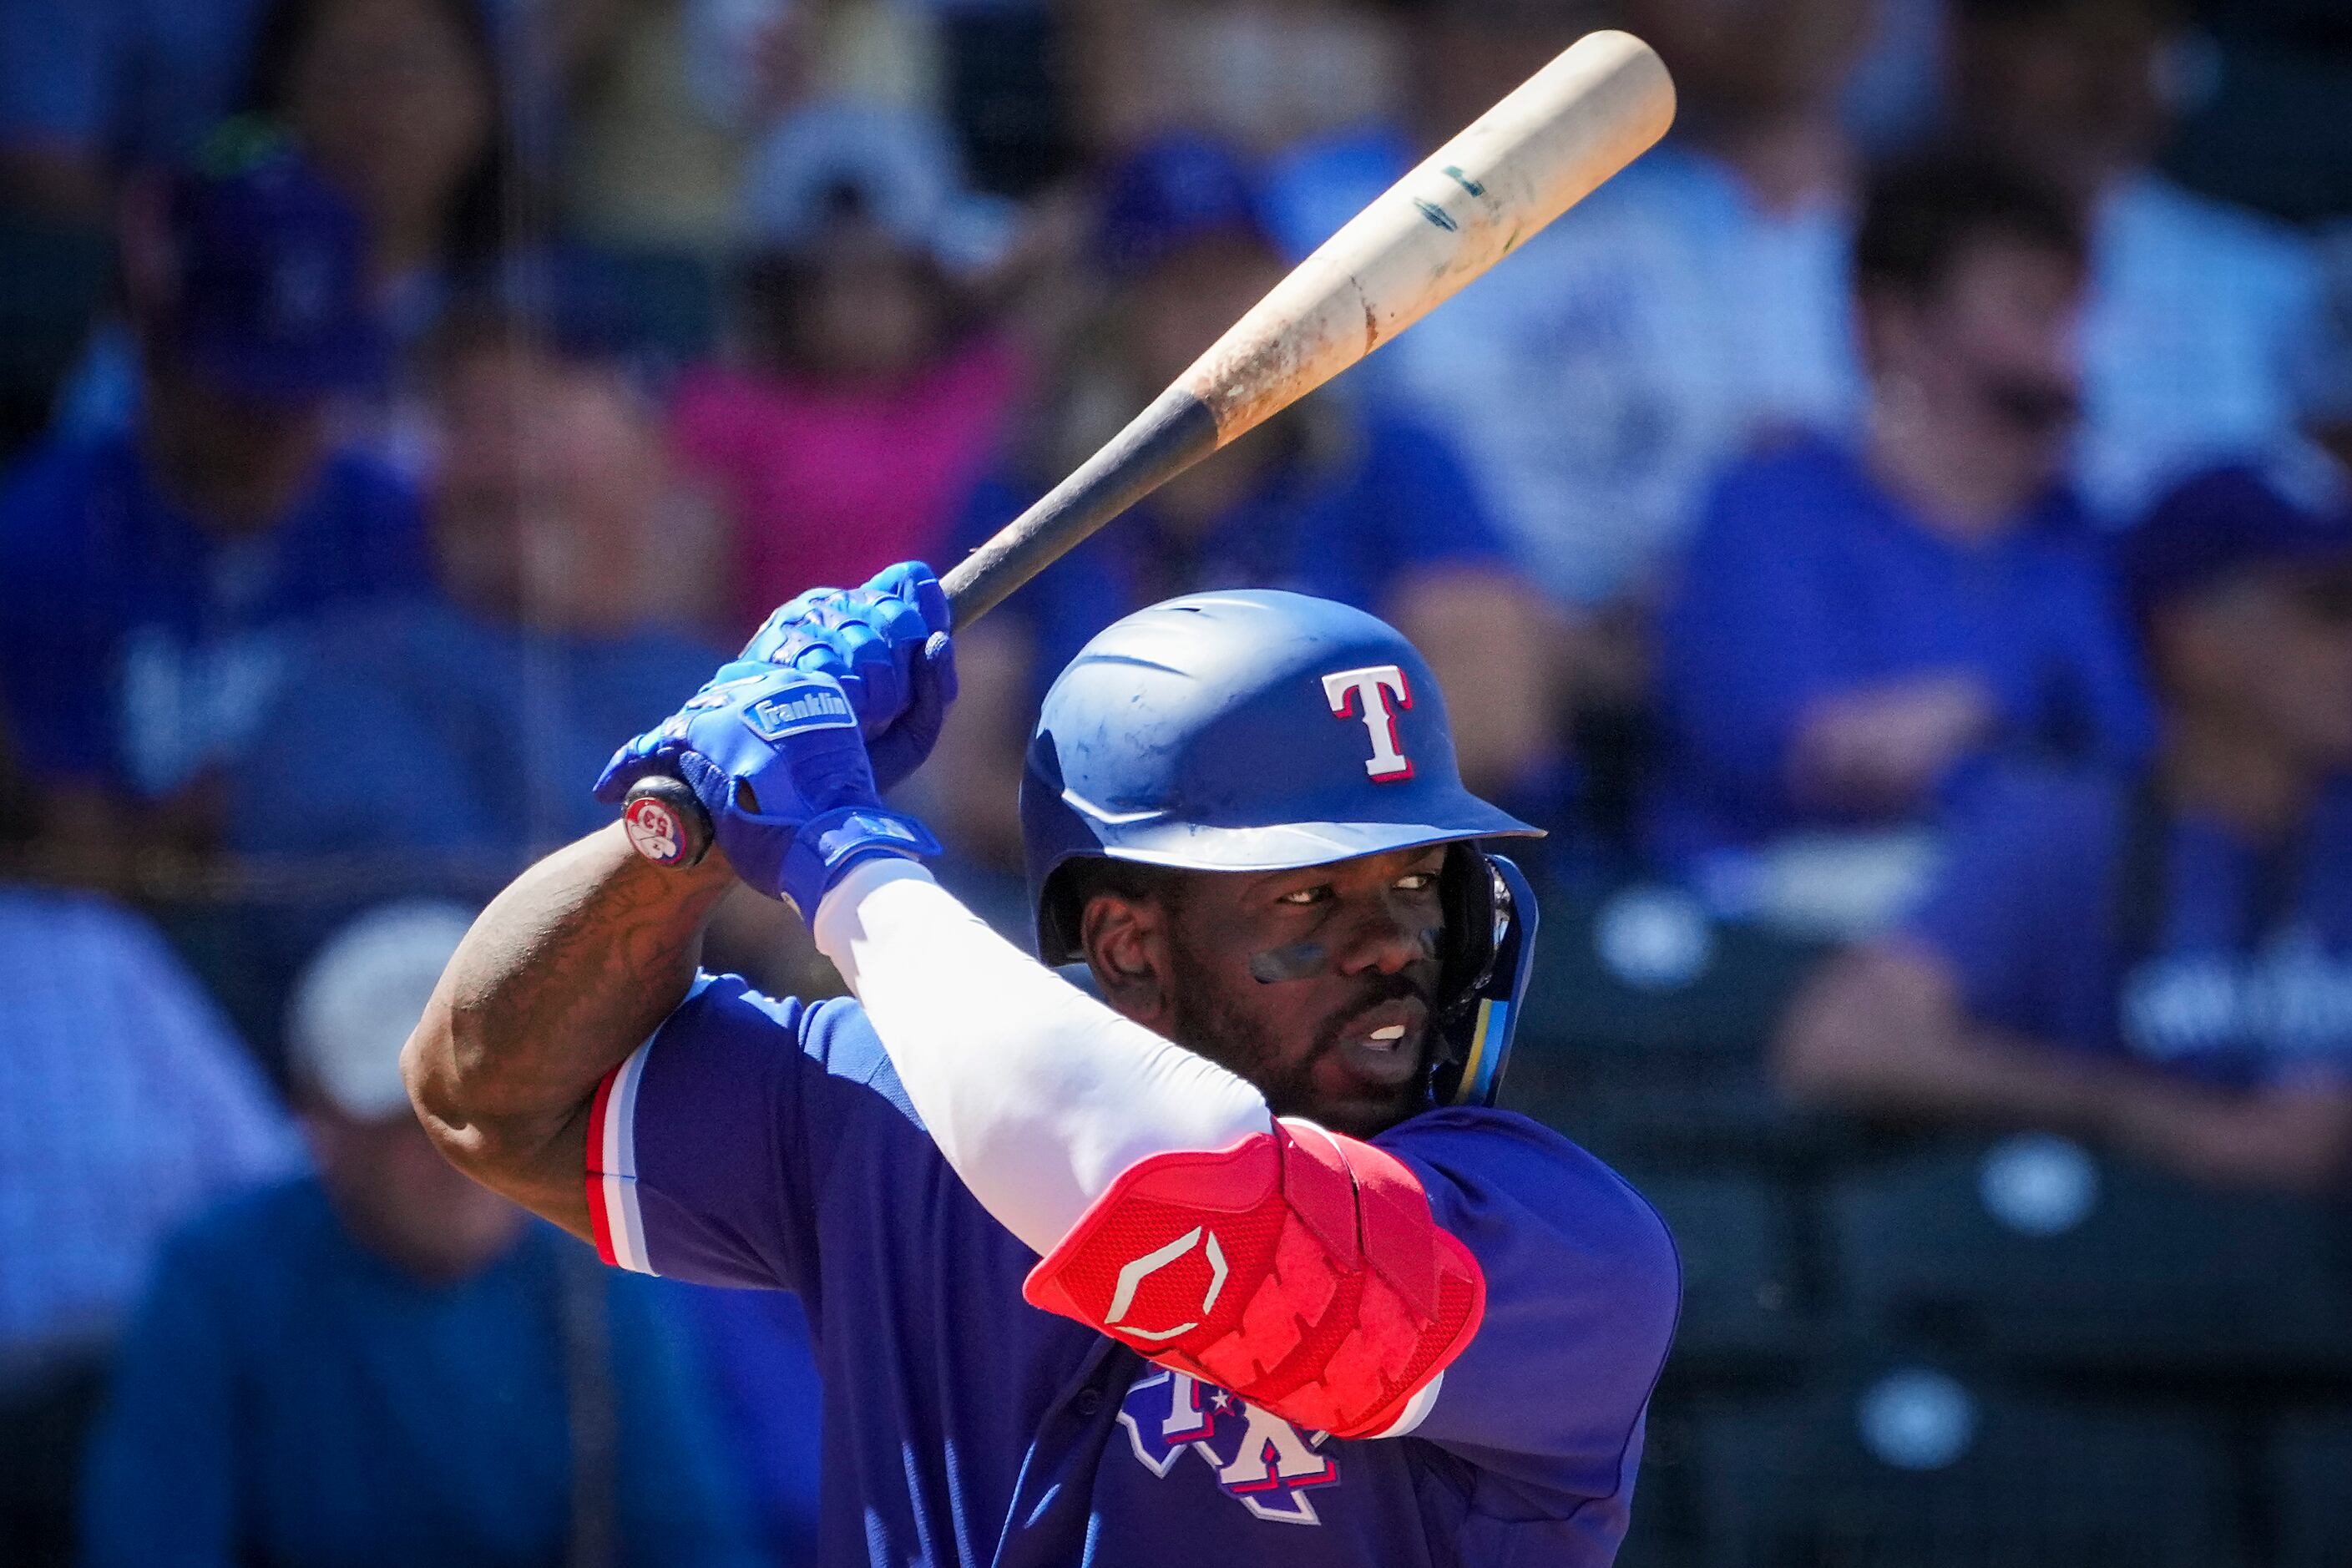 Cuba asked Adolis García to play in WBC, but Rangers OF chose spring  training instead